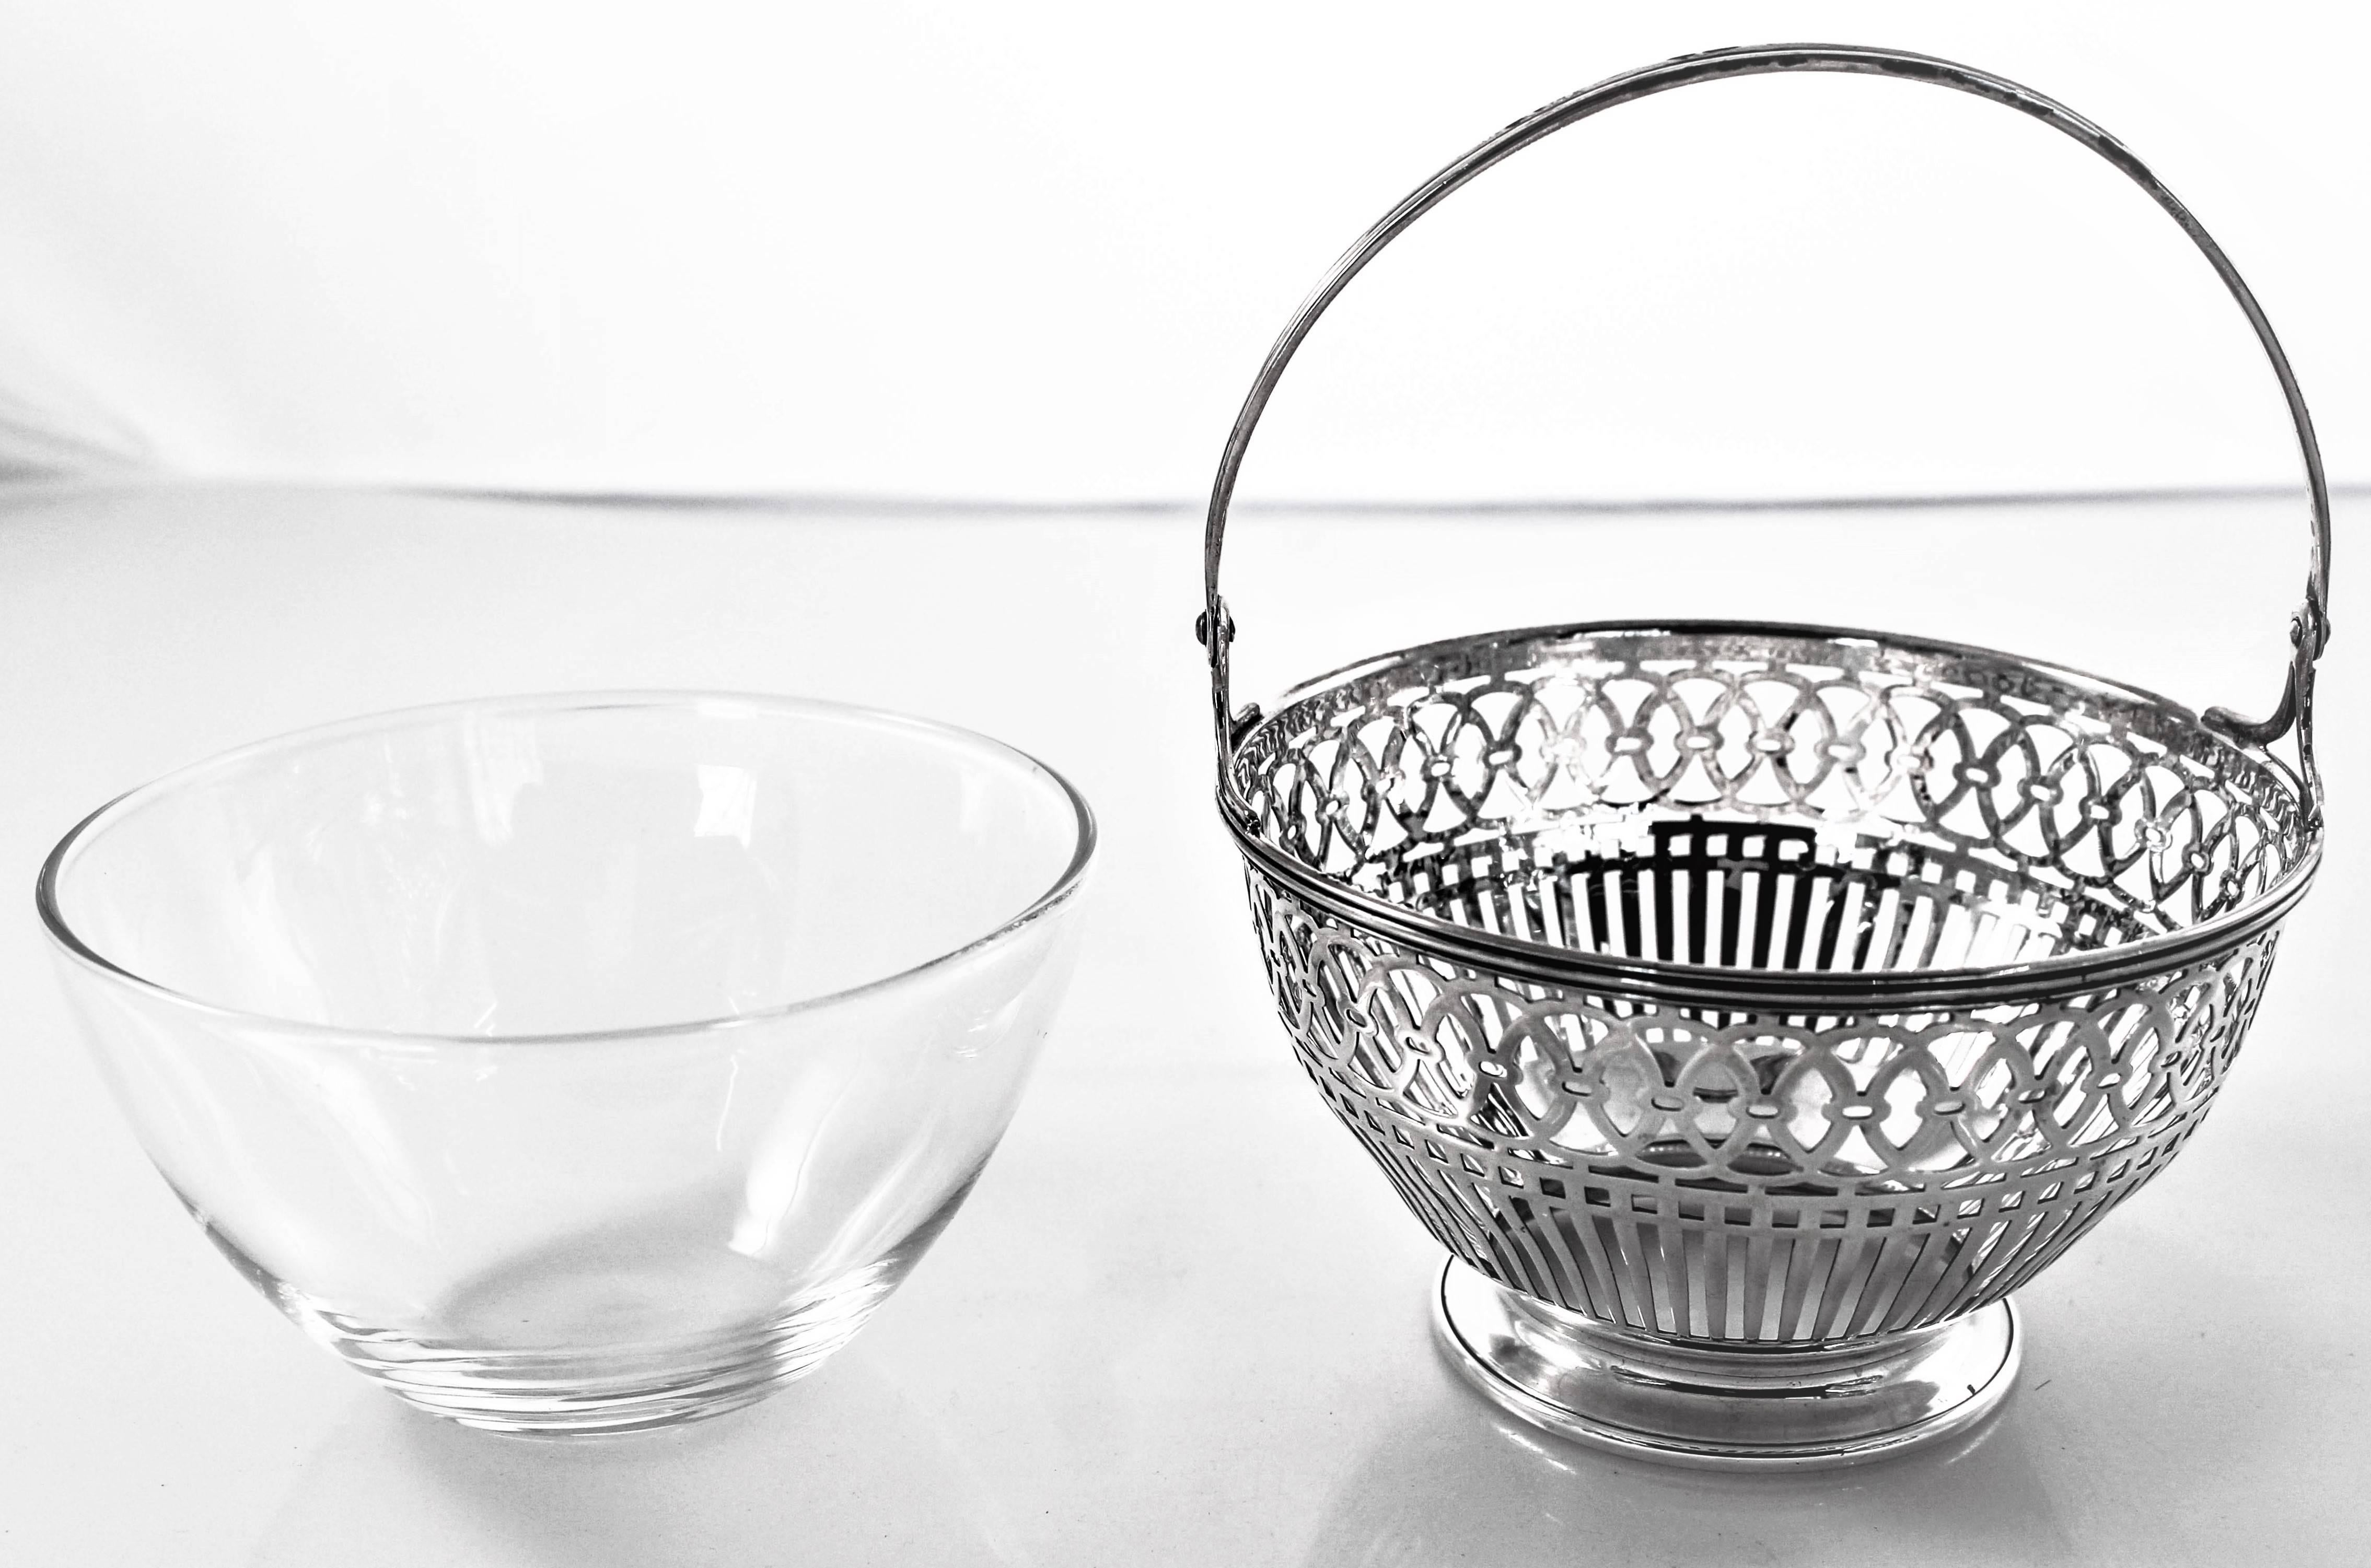 An entire body of pretty lattice work and a handle that folds down for easy storage. This basket can be used for a host of things: fill it with chocolates and sweets, maybe a relish or sauce, or even blueberries. Whichever you choose, cleanup is a